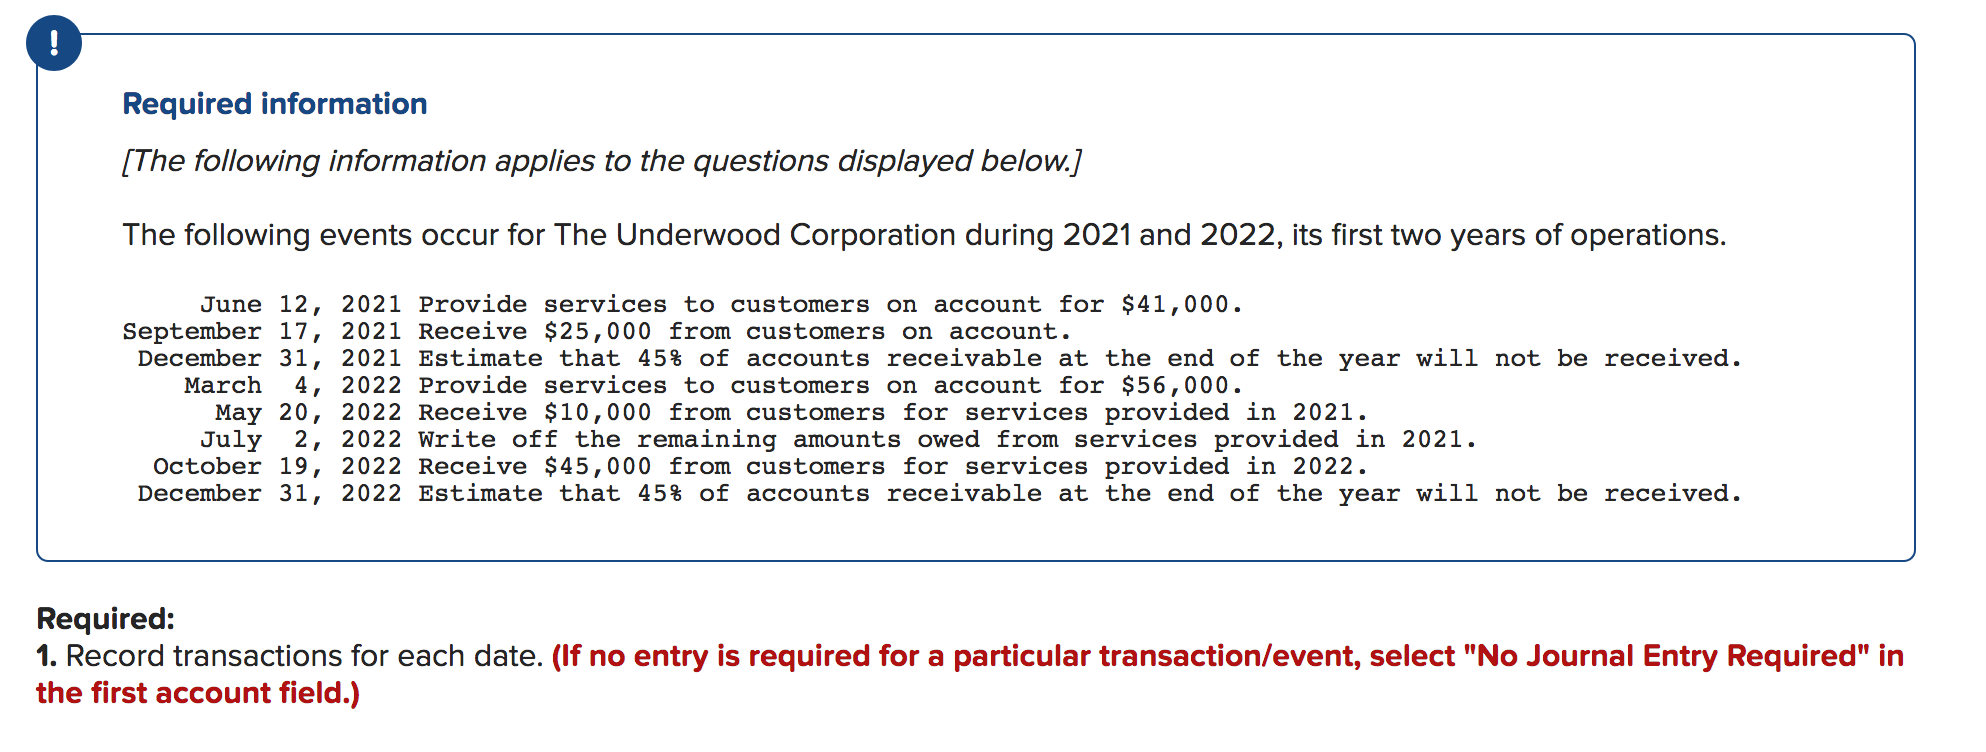 !
Required information
[The following information applies to the questions displayed below.]
The following events occur for The Underwood Corporation during 2021 and 2022, its first two years of operations.
June 12, 2021 Provide services to customers on account for $41,000.
September 17, 2021 Receive $25,000 from customers on account.
December 31, 2021 Estimate that 45% of accounts receivable at the end of the year will not be received.
March
4, 2022 Provide services to customers on account for $56,000
May 20, 2022 Receive $10,000 from customers for services provided in 2021
July 2, 2022 Write off the remaining amounts owed from services provided in 2021.
October 19, 2022 Receive $45,000 from customers for services provided in 2022.
December 31, 2022 Estimate that 45% of accounts receivable at the end of the year will not be received.
Required:
1. Record transactions for each date. (If no entry is required for a particular transaction/event, select "No Journal Entry Required" in
the first account field.)
